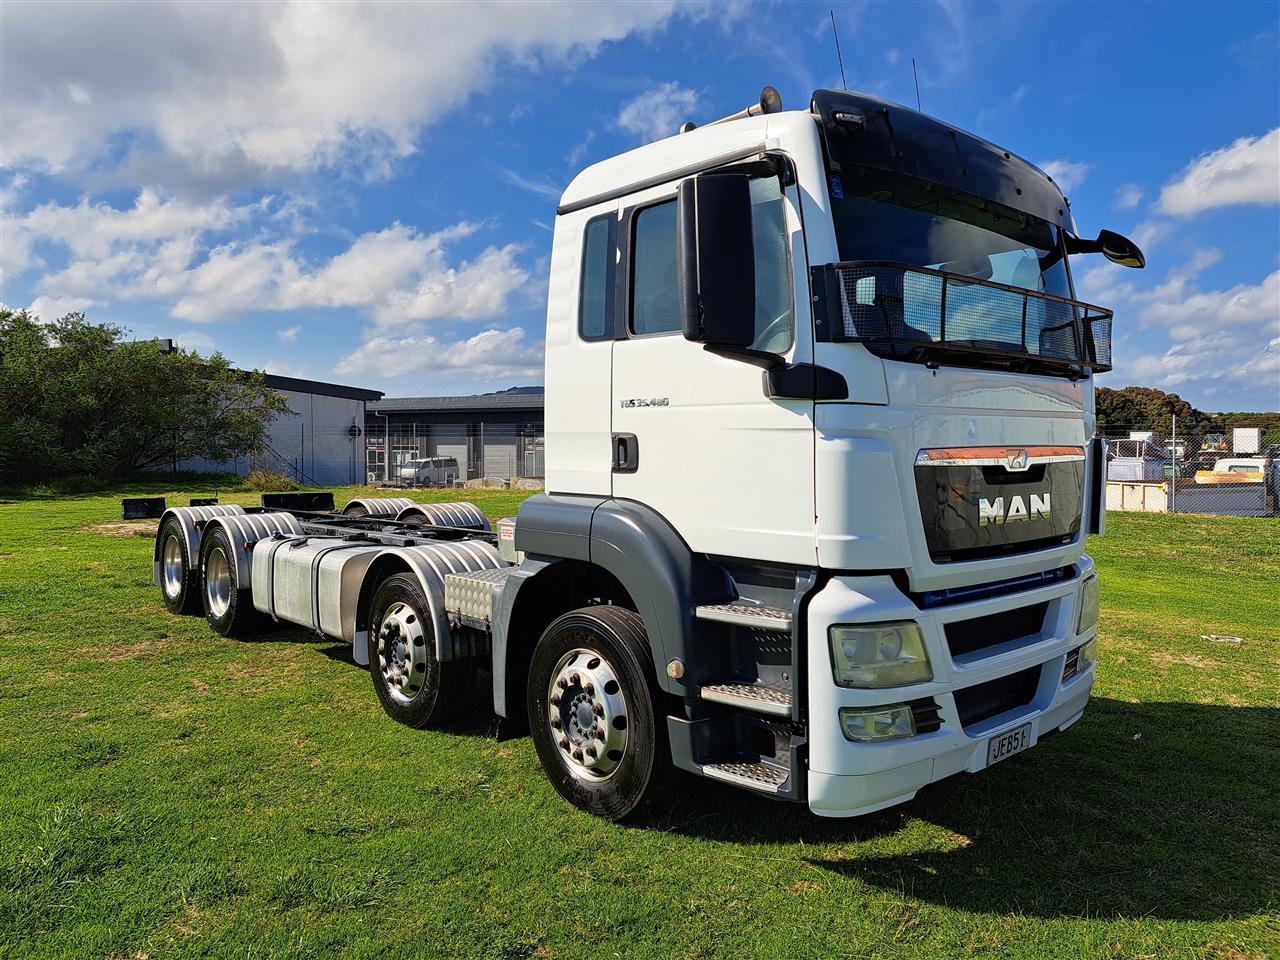 Image - 2015 MAN TGS - 8x4 Cab and Chassis